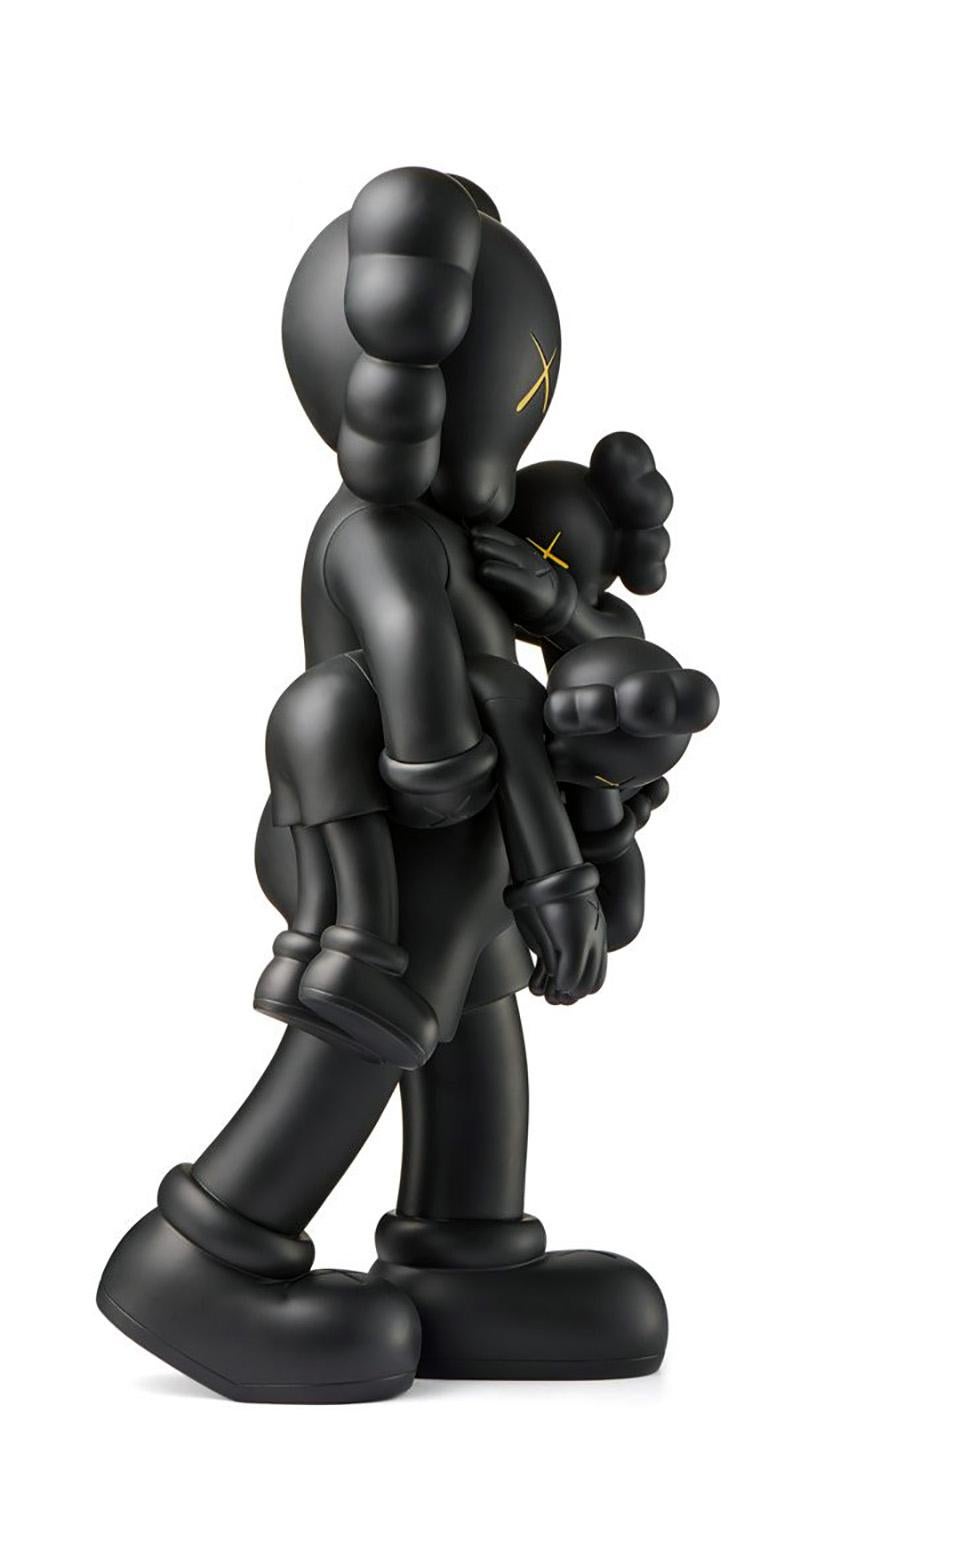 KAWS Clean Slate Set of 2 (Black & Grey), new & unopened in their original packaging. 
A well-received work and variation of KAWS' large scale Clean Slate sculpture - a key highlight of KAWS’ major museum exhibition KAWS: WHERE THE END STARTS where